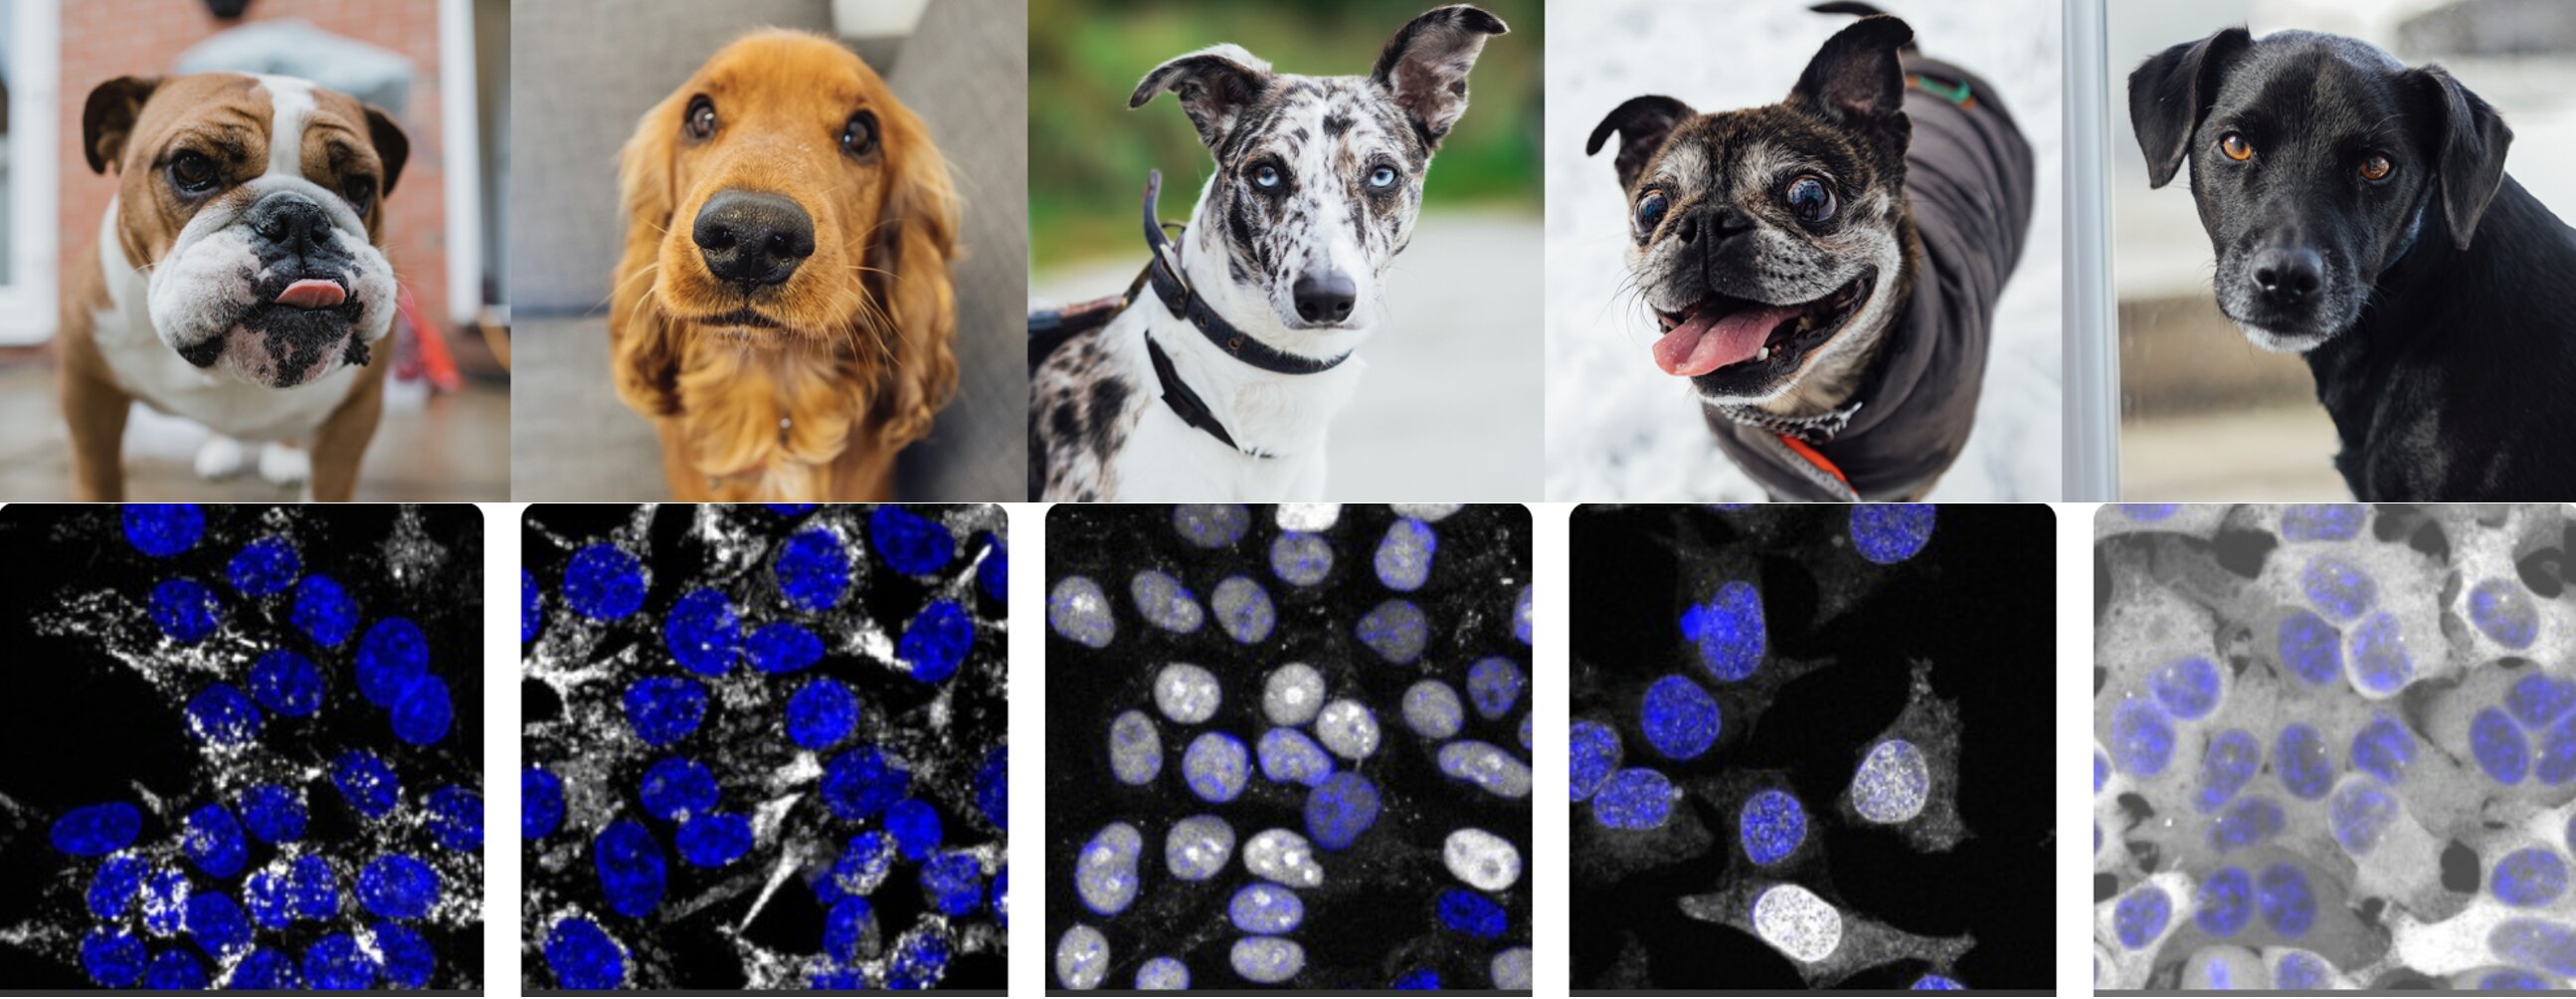 AI can reveal new cell biology just by looking at images